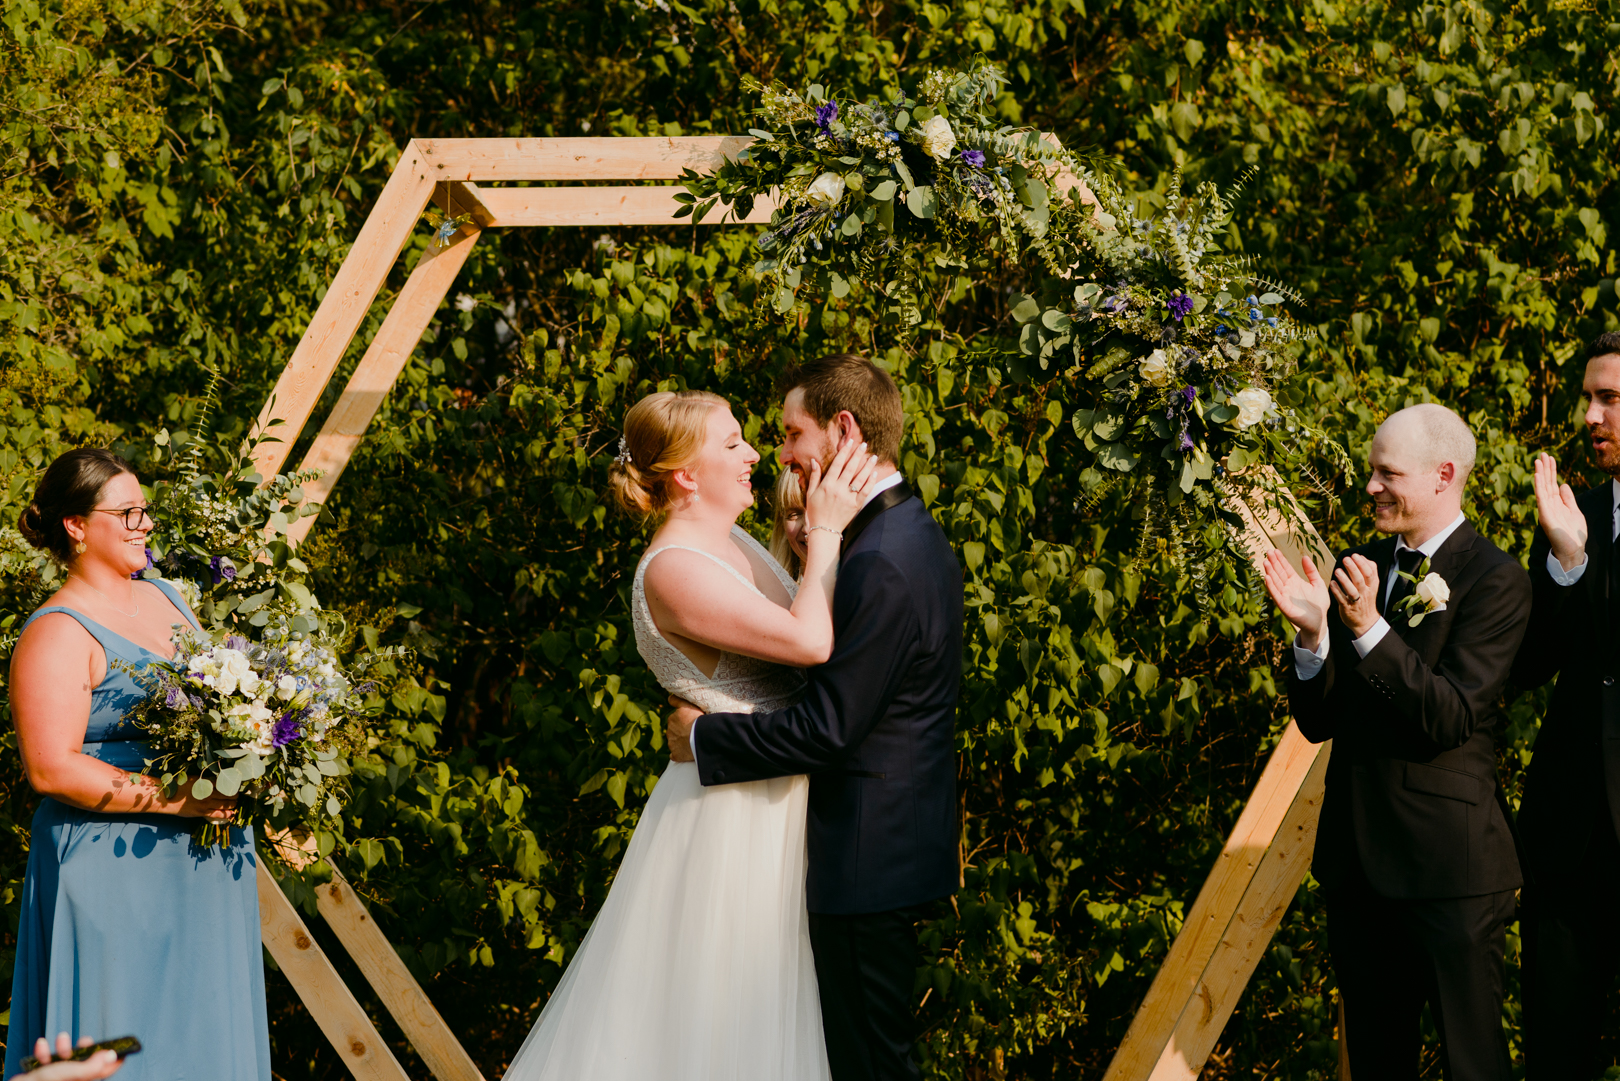 bride and groom first kiss in front of wooden hexagon during outdoor wedding ceremony